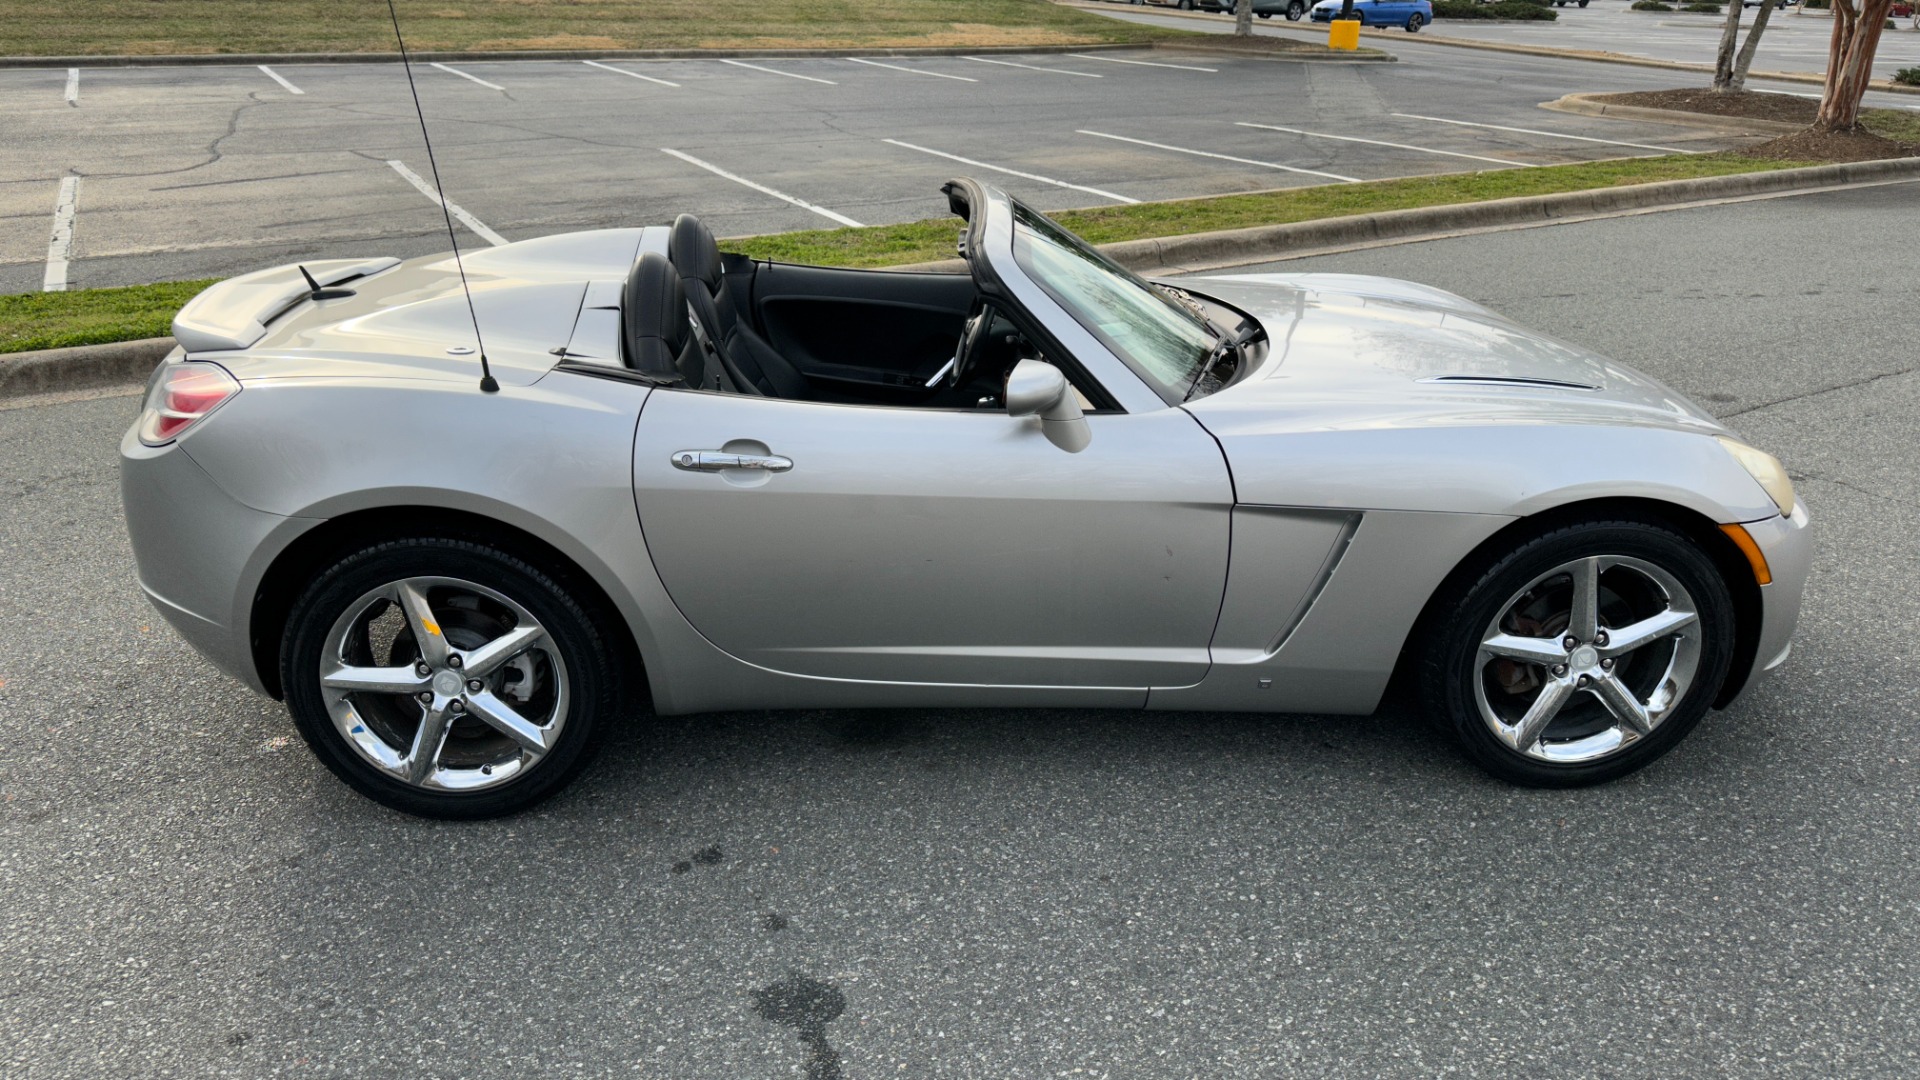 Used 2008 Saturn Sky CONVERTIBLE / MONSOON AUDIO / AUTOMATIC / PREMIUM TRIM / SPOILER for sale $10,995 at Formula Imports in Charlotte NC 28227 5